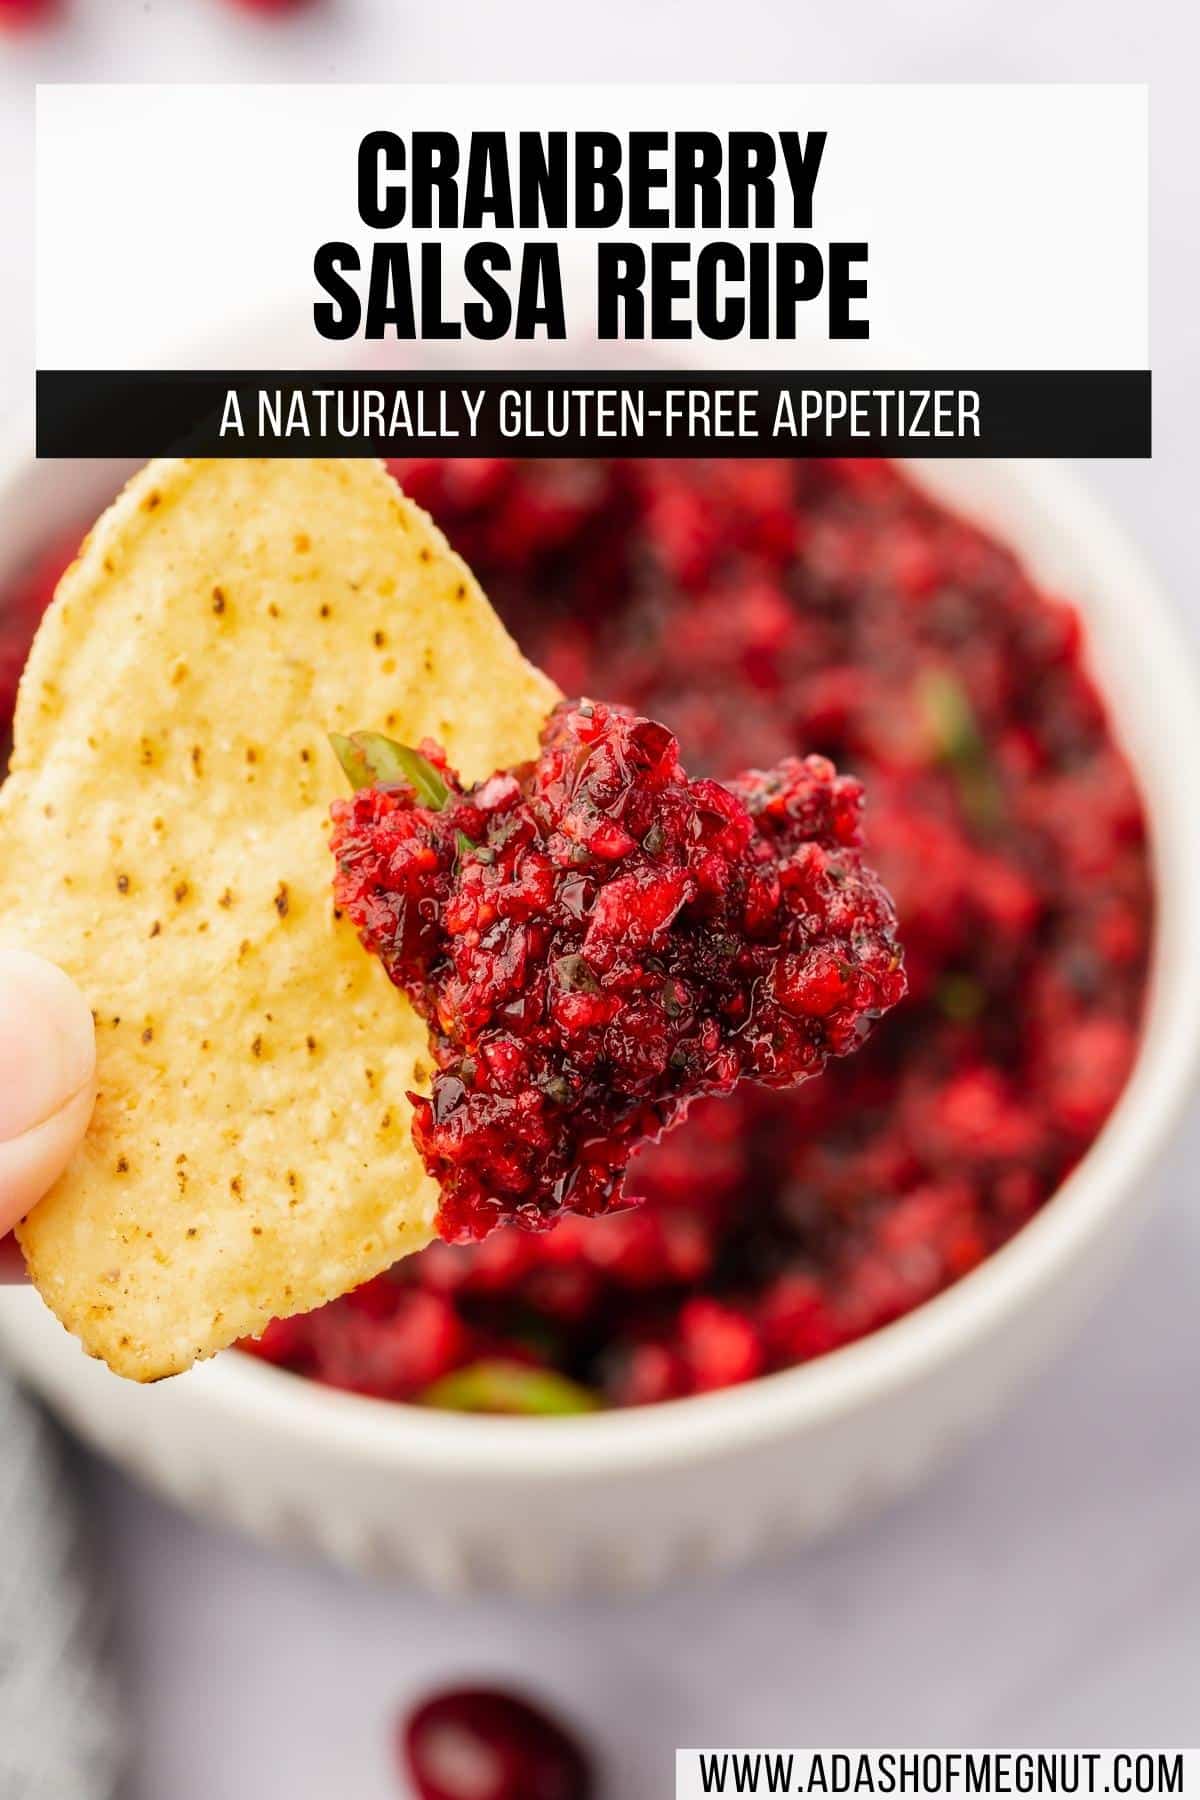 A tortilla chip with a scoop of cranberry salsa on it with a bowl of salsa below it.